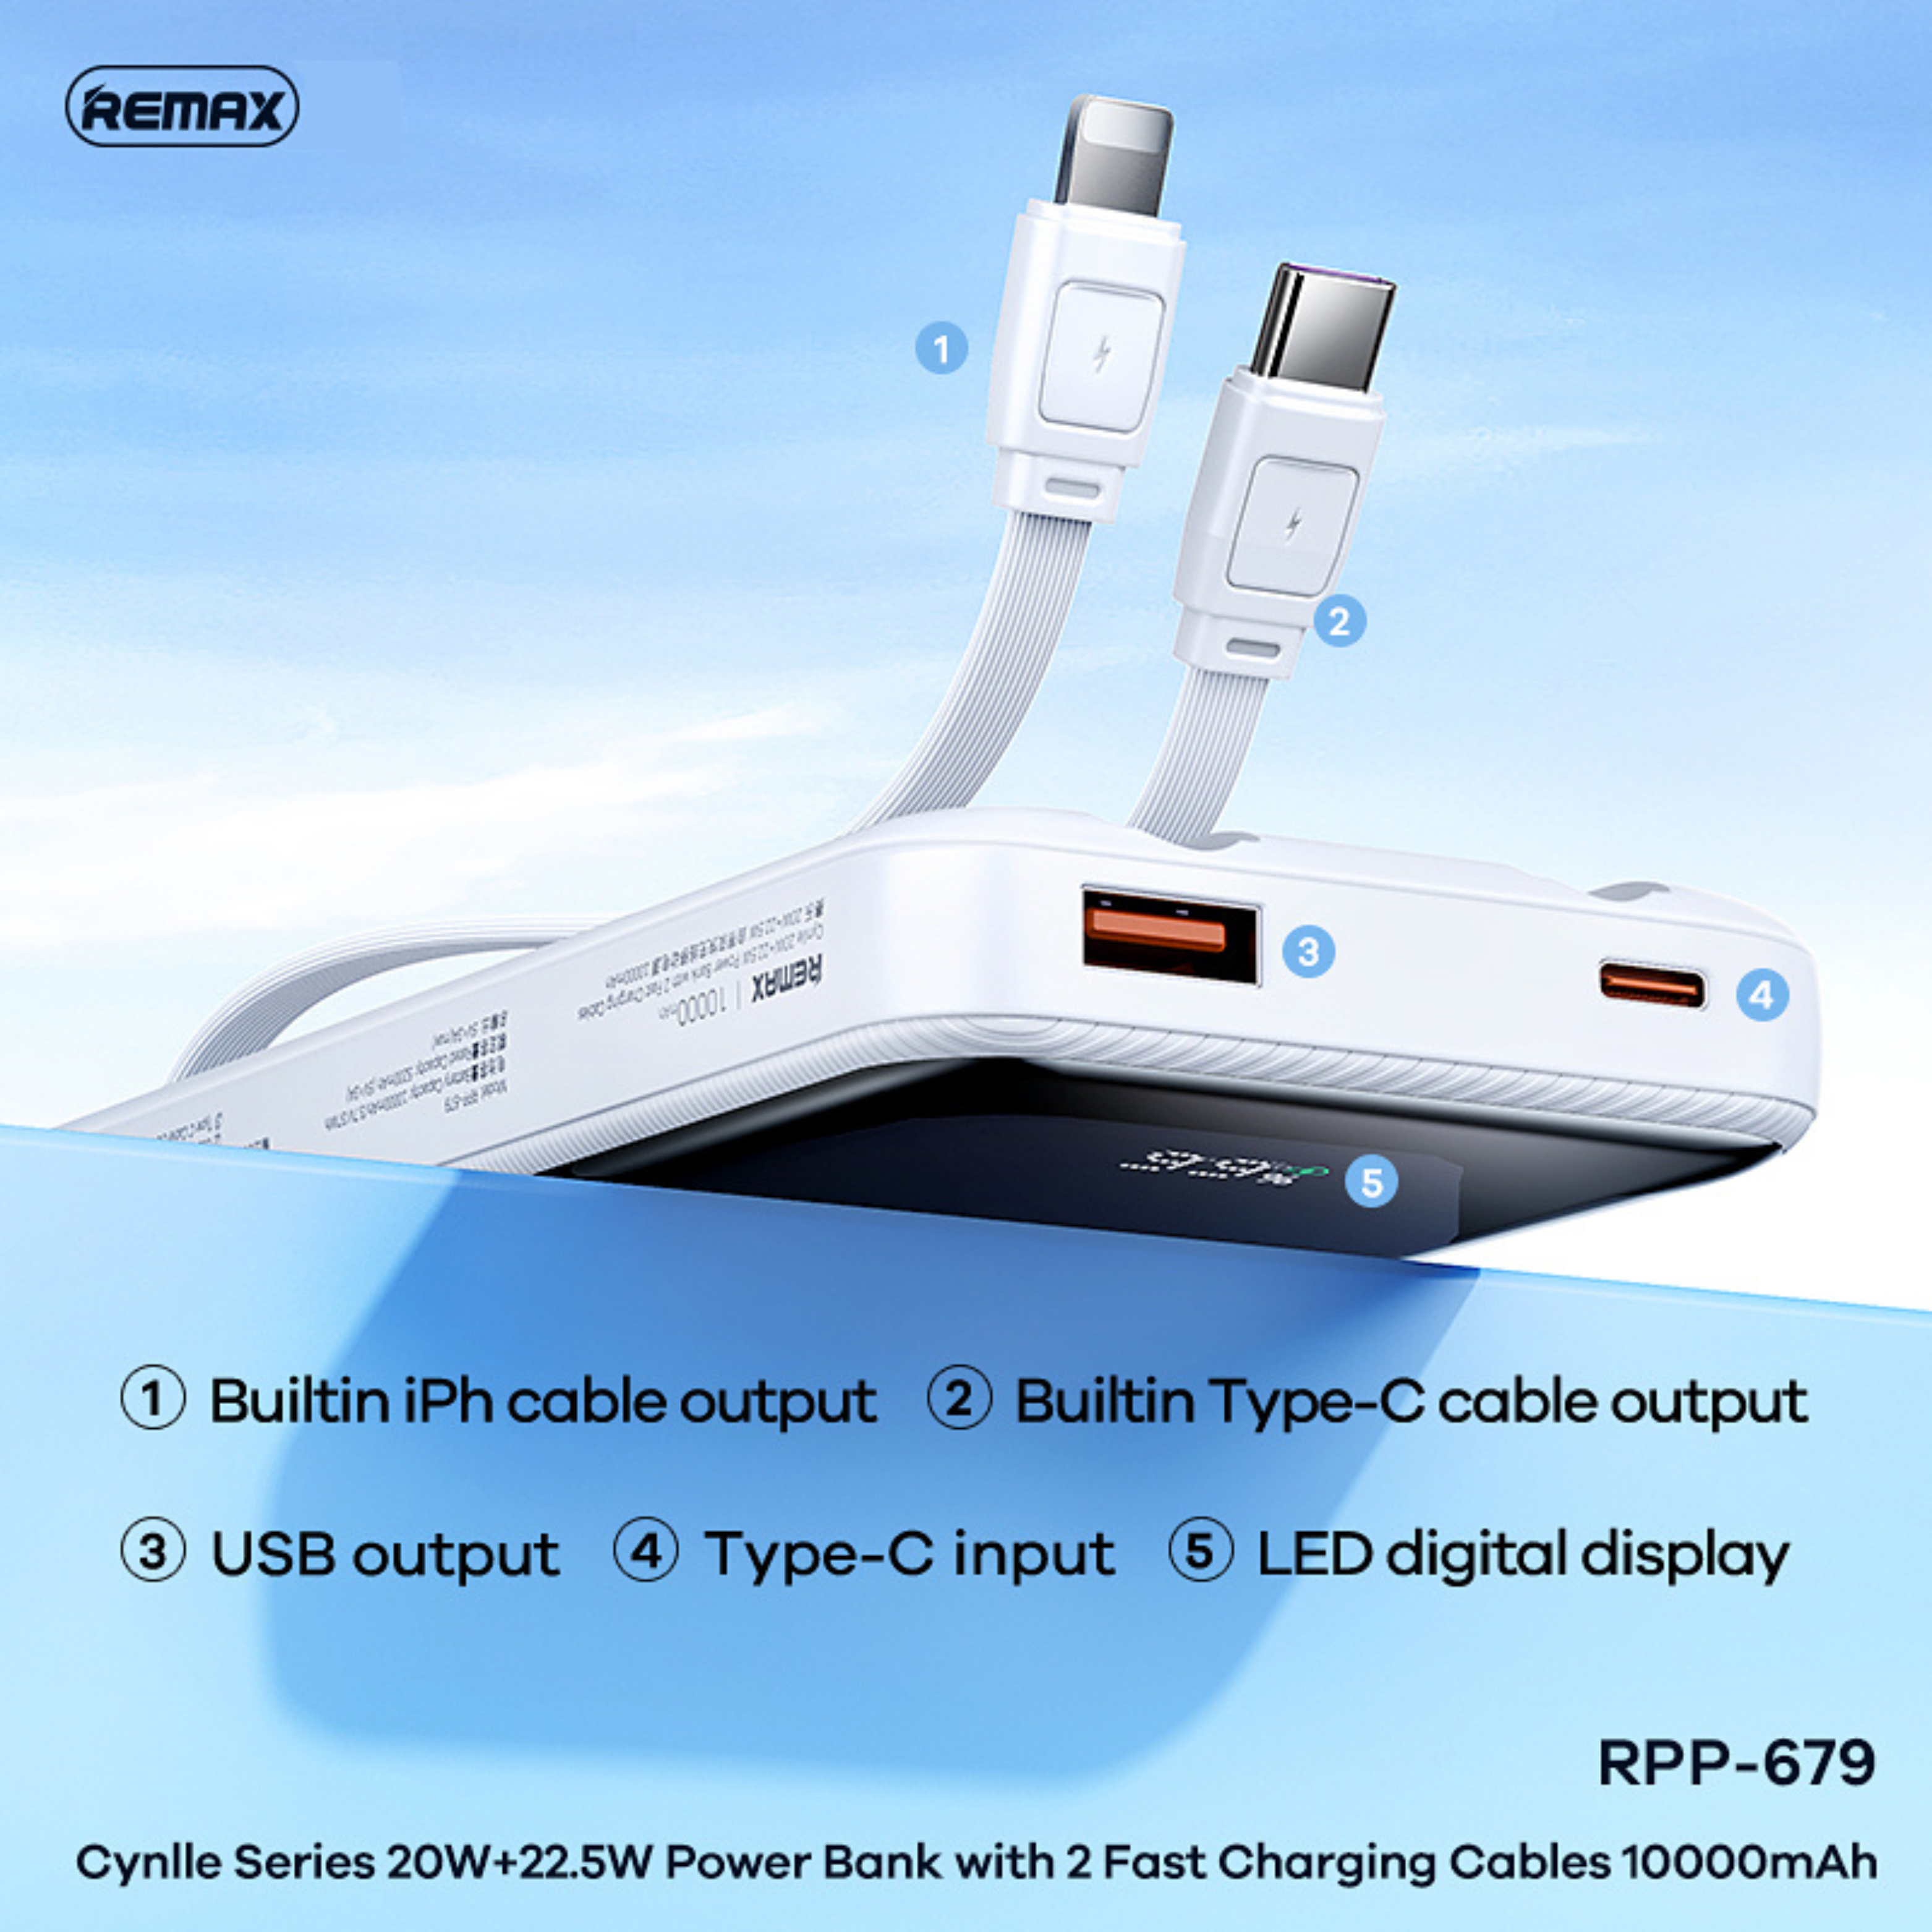 REMAX RPP-679 10000MAH CYNLLE SERIES 20W+22.5W POWER BANK WITH 2 FAST CHARGING CABLE(Blue)